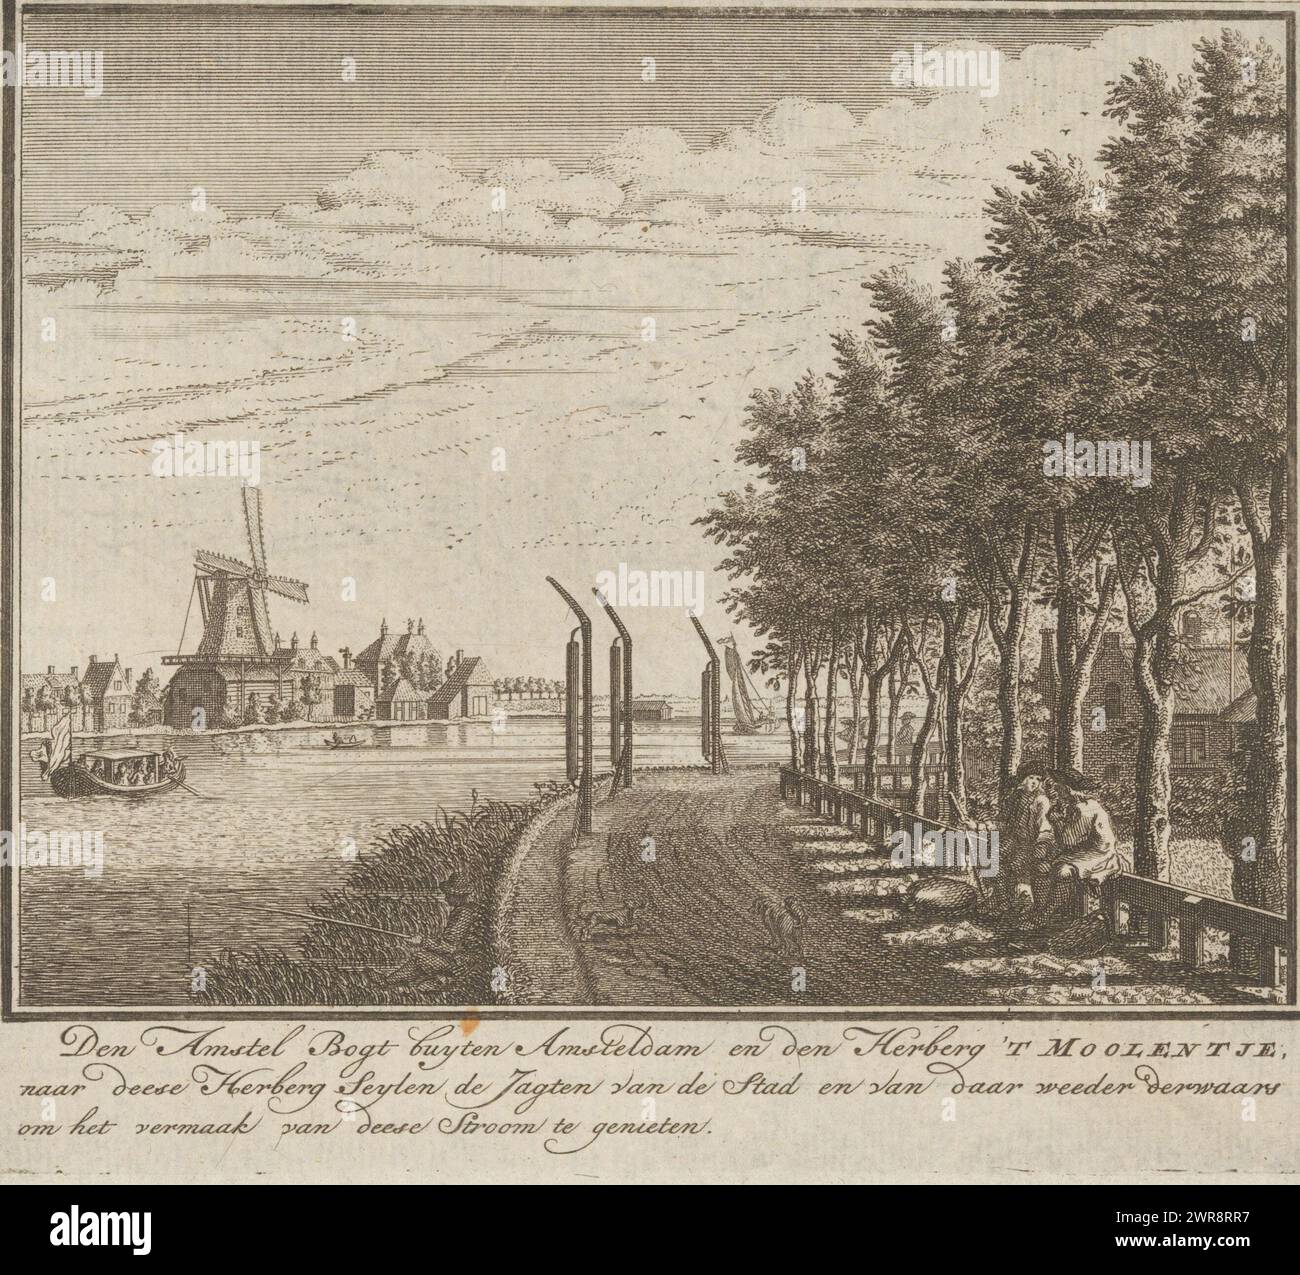 View of the Amstel at the Molentje inn, Den Amstel Bogt buyten Amsteldam and the Herberg 'T Moolentje. to this Herberg Seyten de Jagten van de Stad and from there back again to enjoy the entertainment of this Stroom (title on object), print maker: Jan Caspar Philips, after own design by: Jan Caspar Philips, publisher: Arend van Huyssteen, (possibly), Amsterdam, 1736 - 1773, paper, etching, engraving, height 137 mm × width 159 mm, print Stock Photo